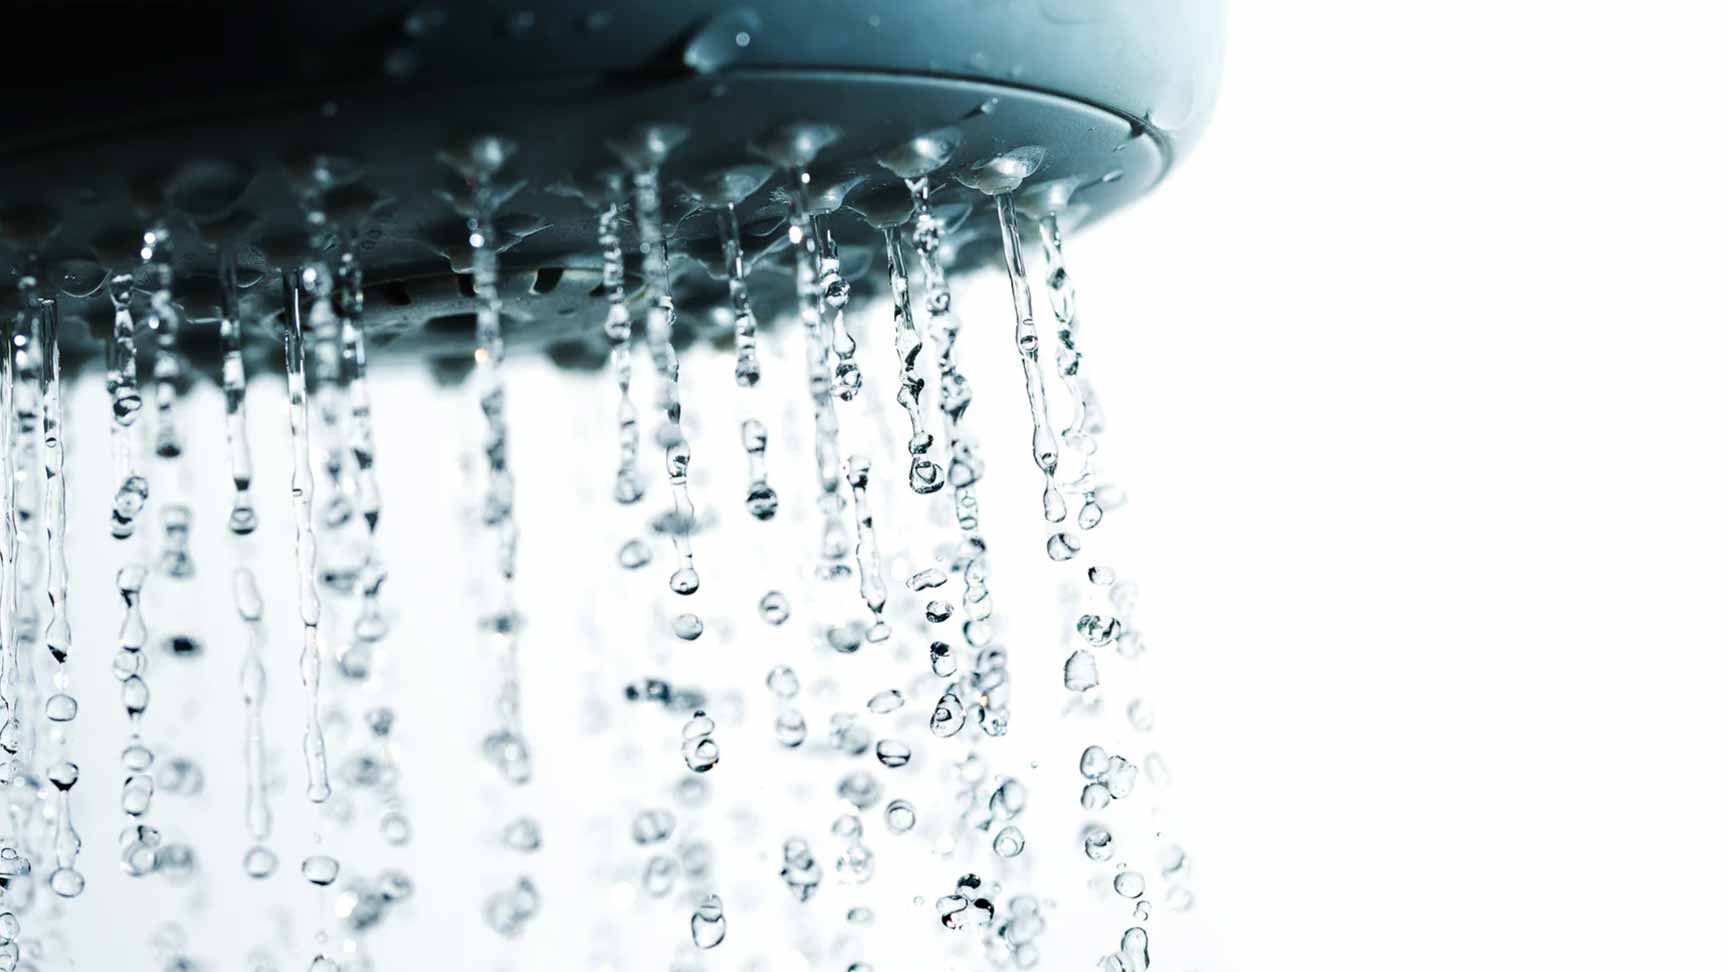 Buying a Portable Shower? Here’s 5 Things You Need to Consider